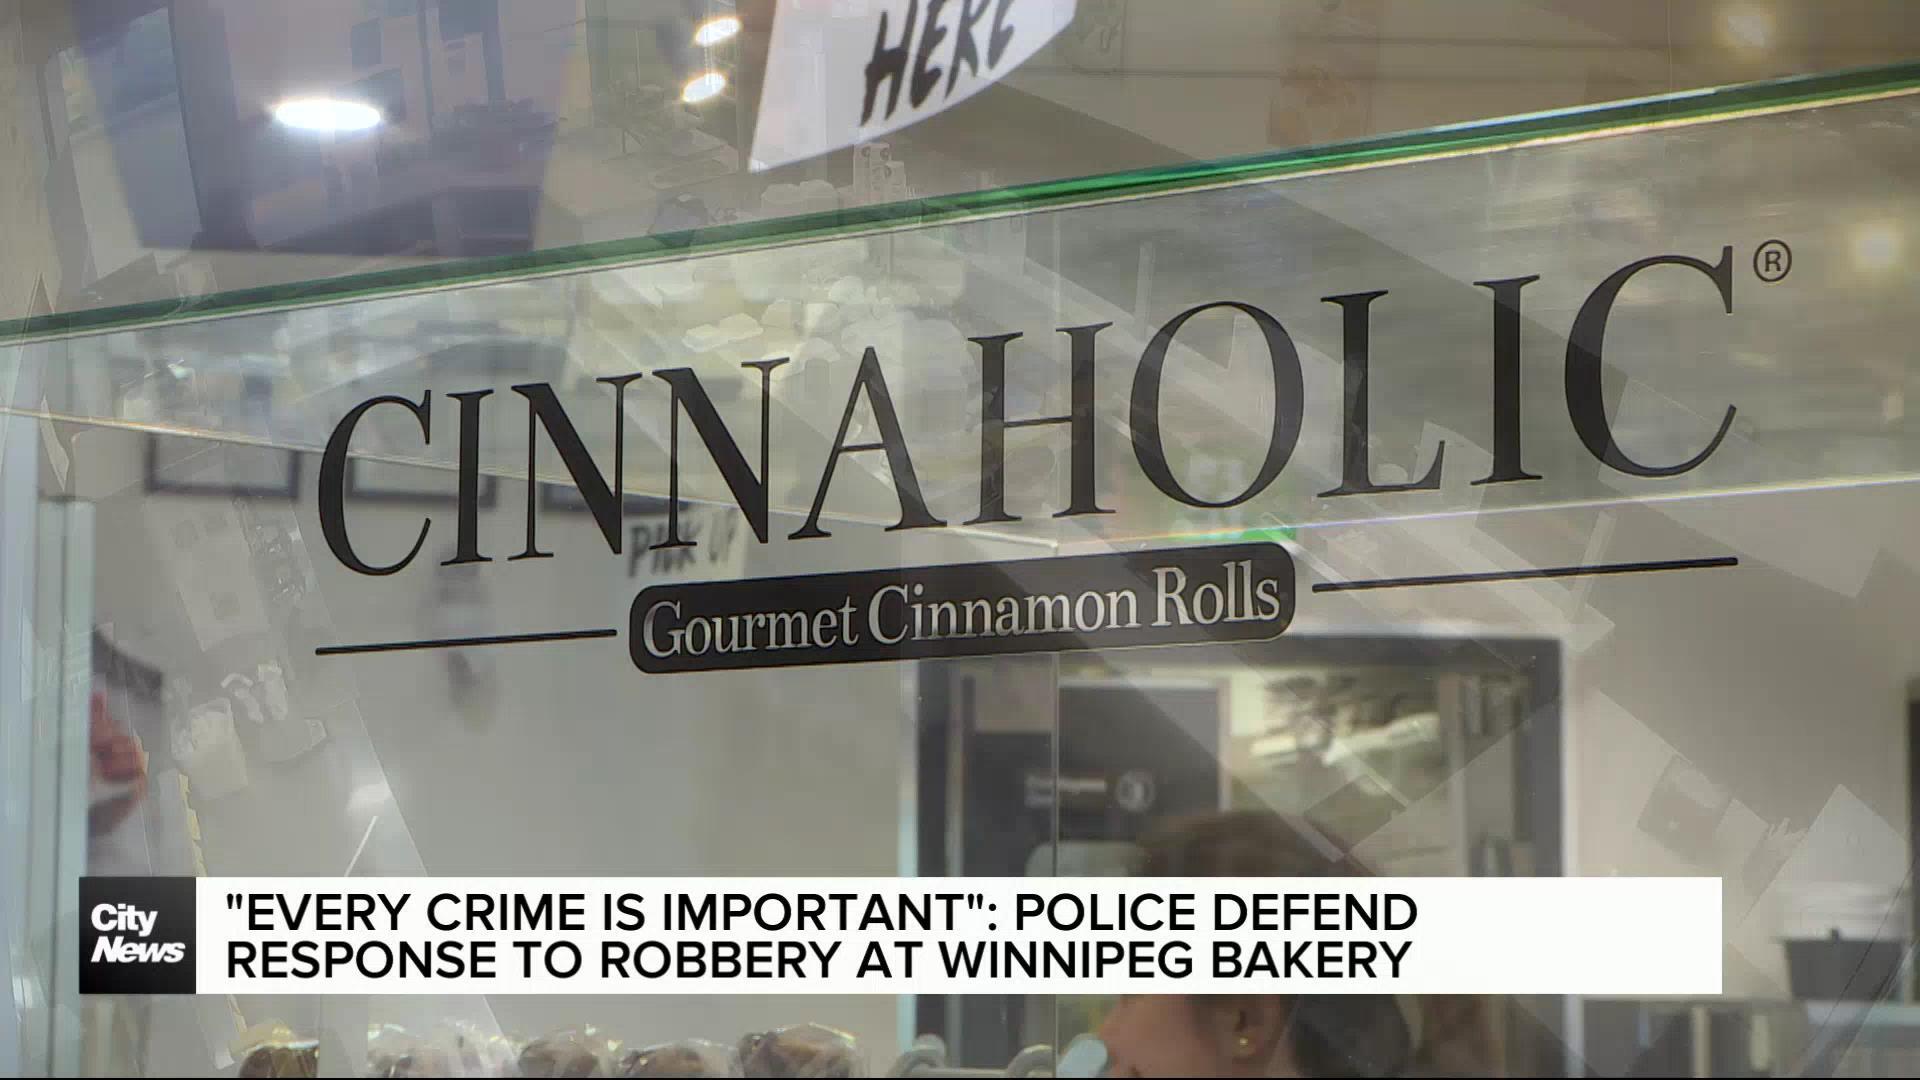 Winnipeg police respond to claims of delayed response at city bakery